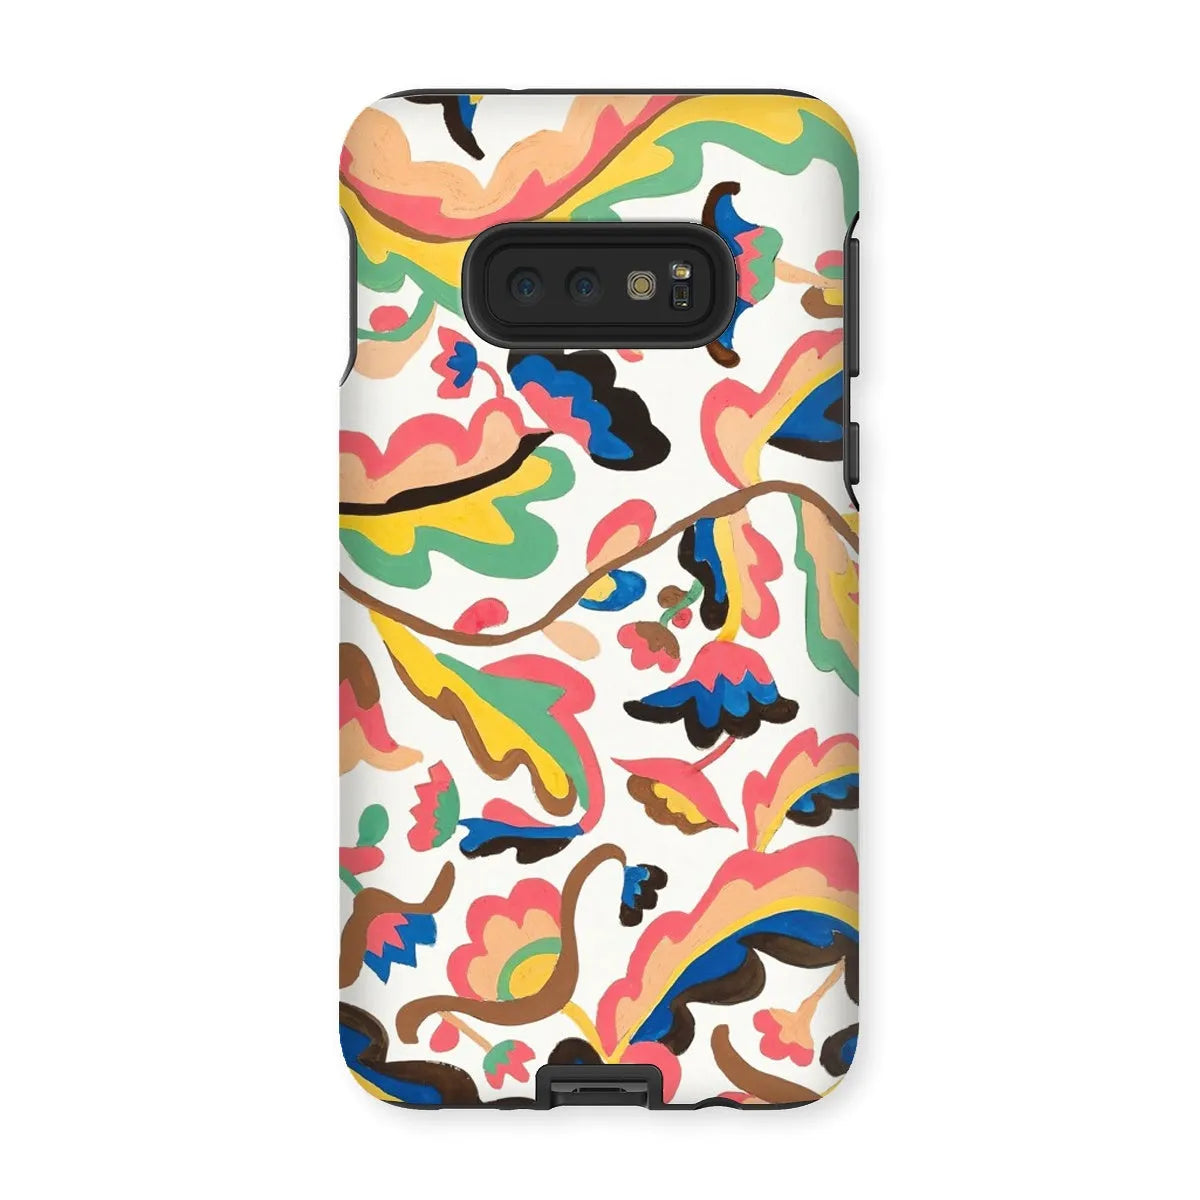 Colcha Floral Aesthetic Pattern Phone Case - Etna Wiswall - Samsung Galaxy S10e / Matte - Mobile Phone Cases